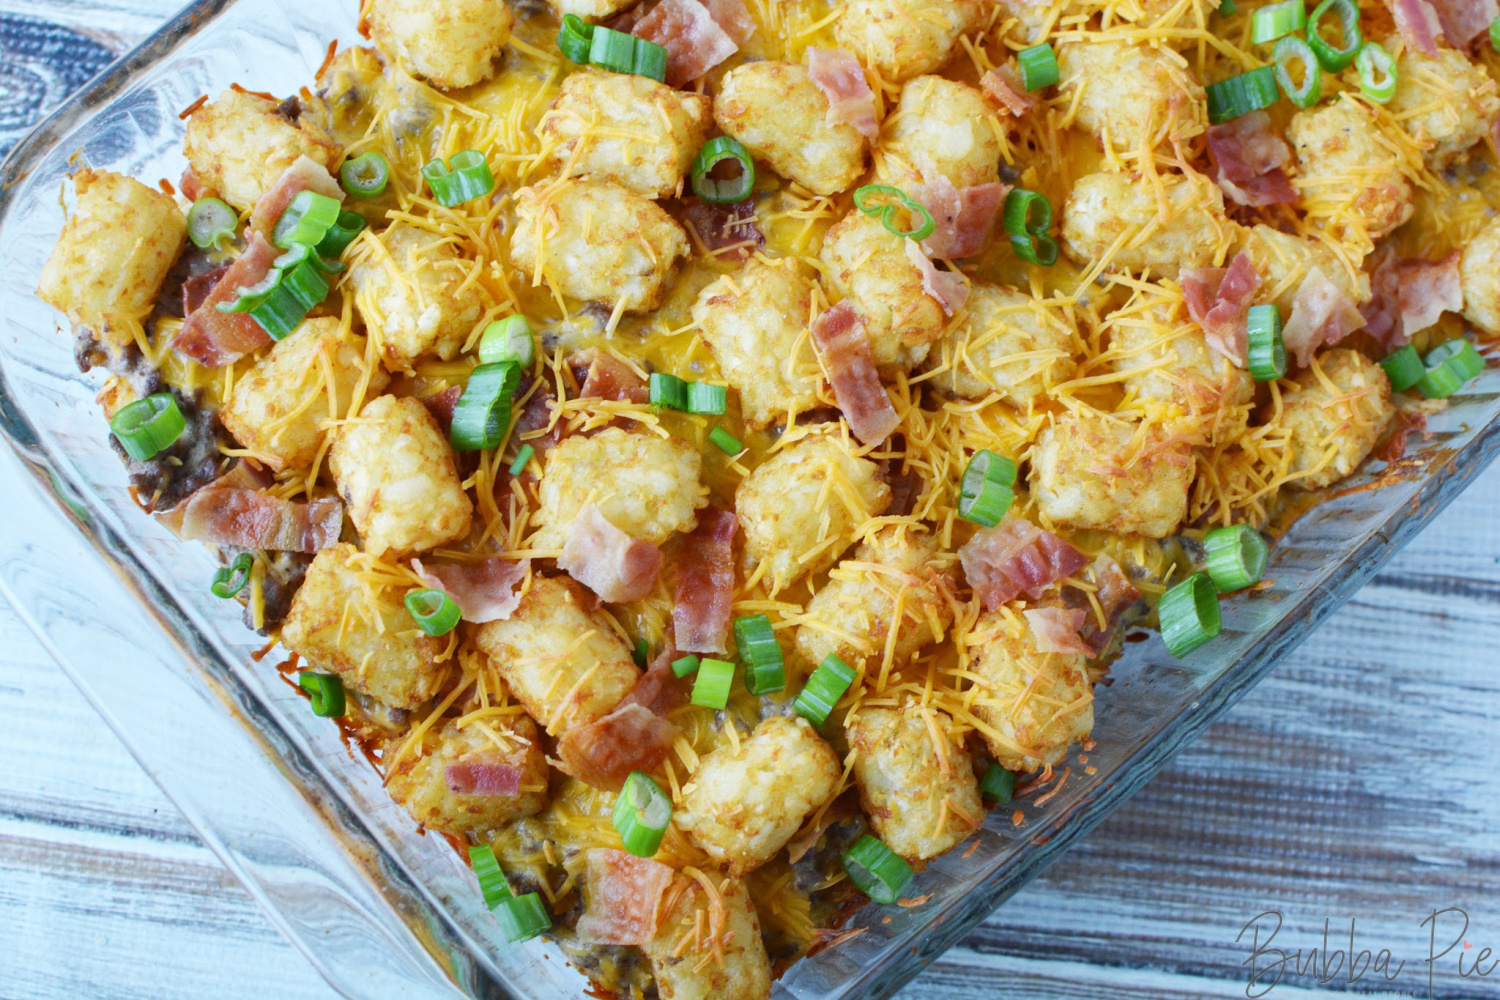 Bacon Cheeseburger Tater Tot Casserole sitting on a table ready to serve for dinner